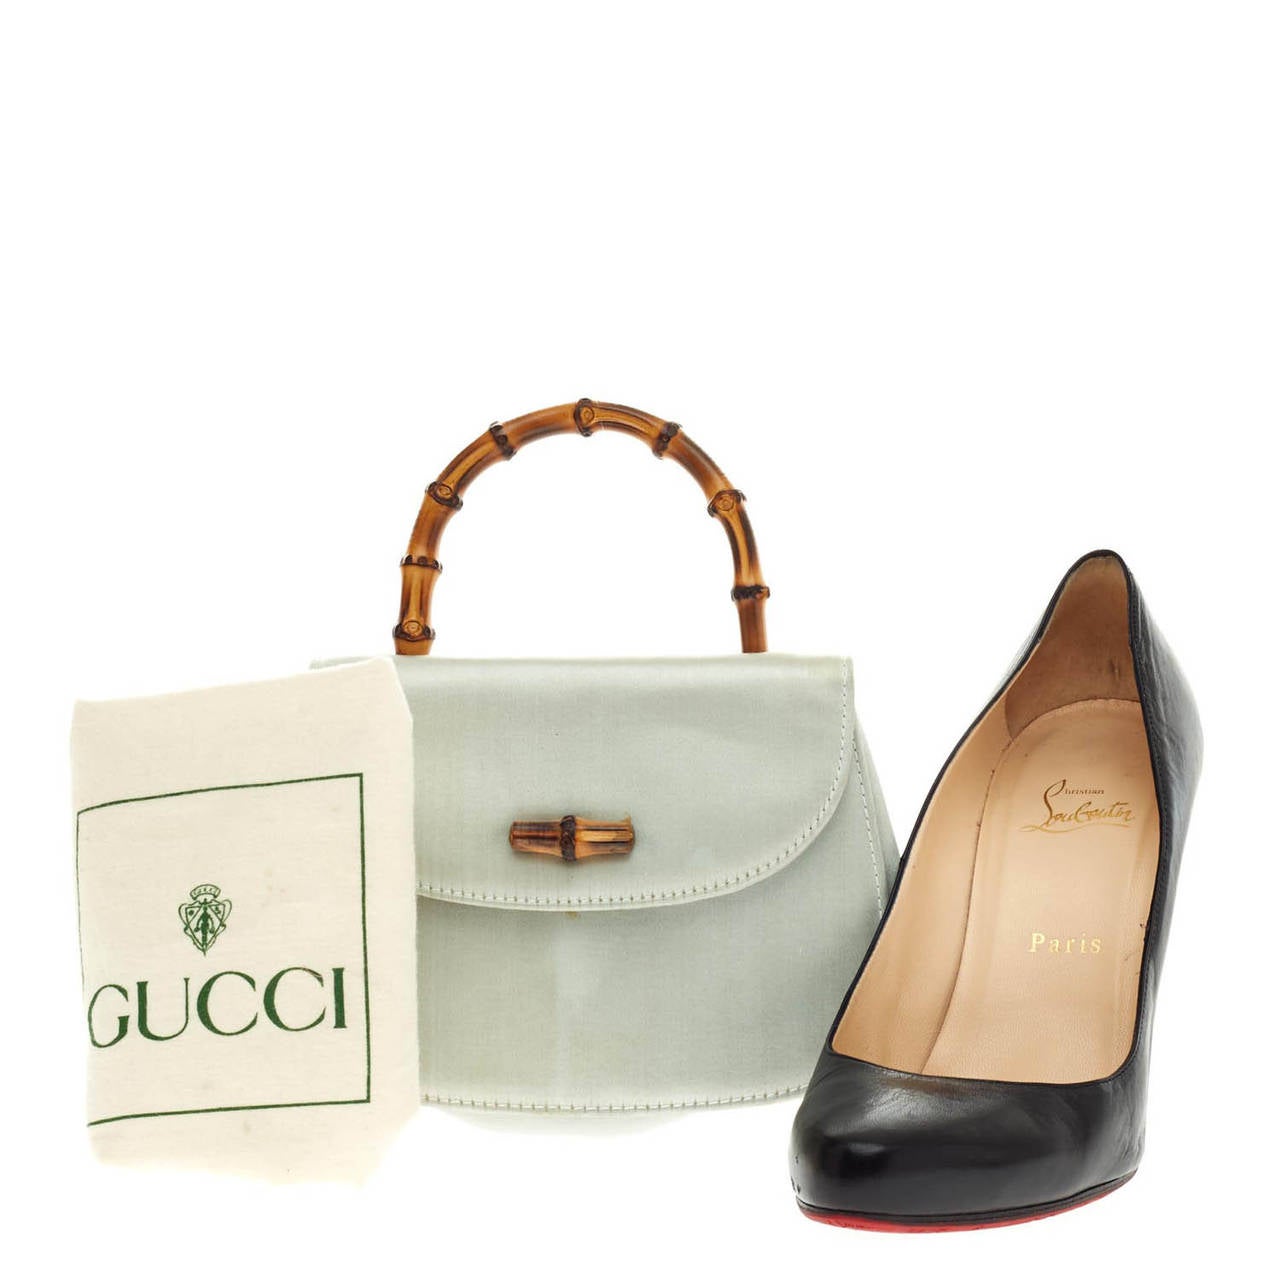 This authentic pre-owned Mini Gucci Bamboo Top Handle is unmistakably a classic Gucci design with its beautiful silvery satin material with undertones of green, and looping bamboo handle. The bamboo turn-lock closure opens to a compact interior and